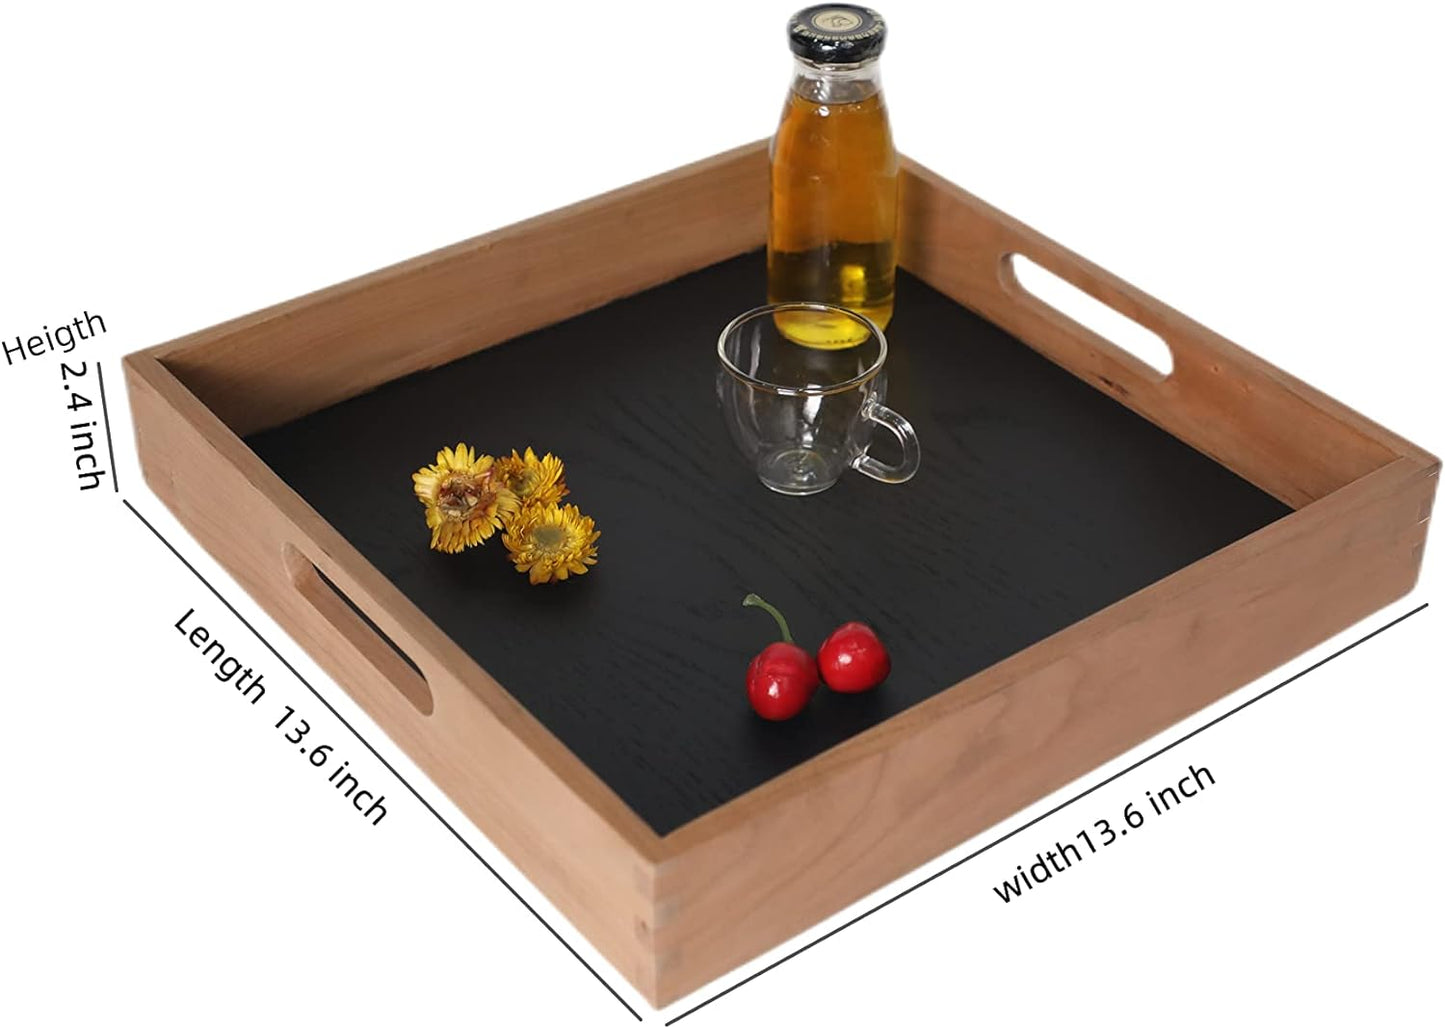 Cherry Wood Square Serving Tray with Handles, for ottoman, decoration, gifts, display, food service, breakfast in bed, Natural/Black (13.6 x 13.6 x 2.4 Inch)